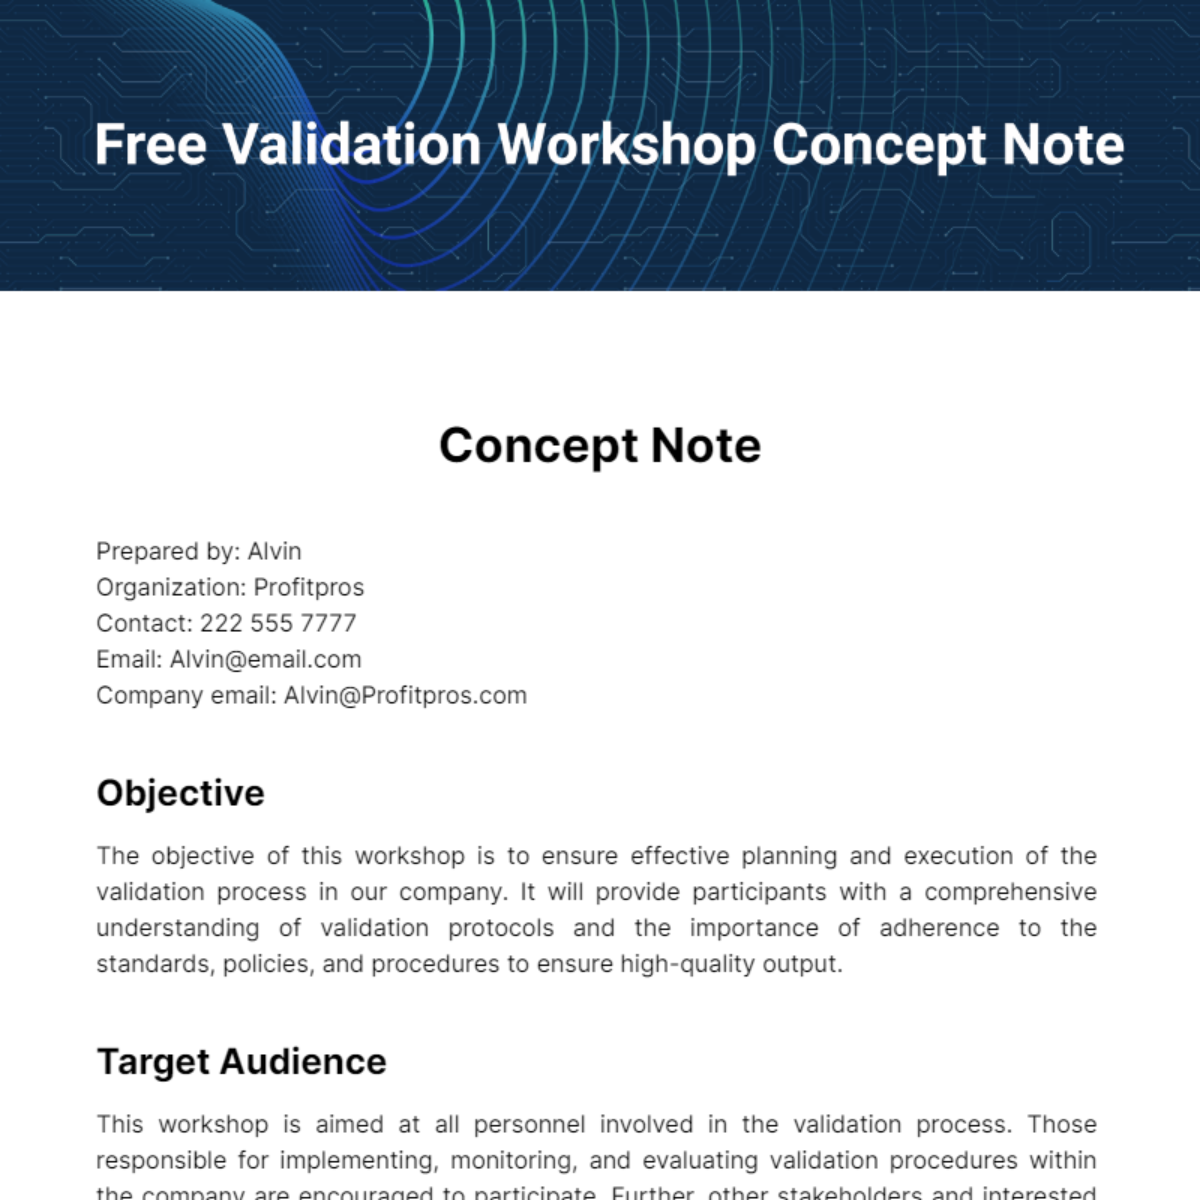 Free Validation Workshop Concept Note Template